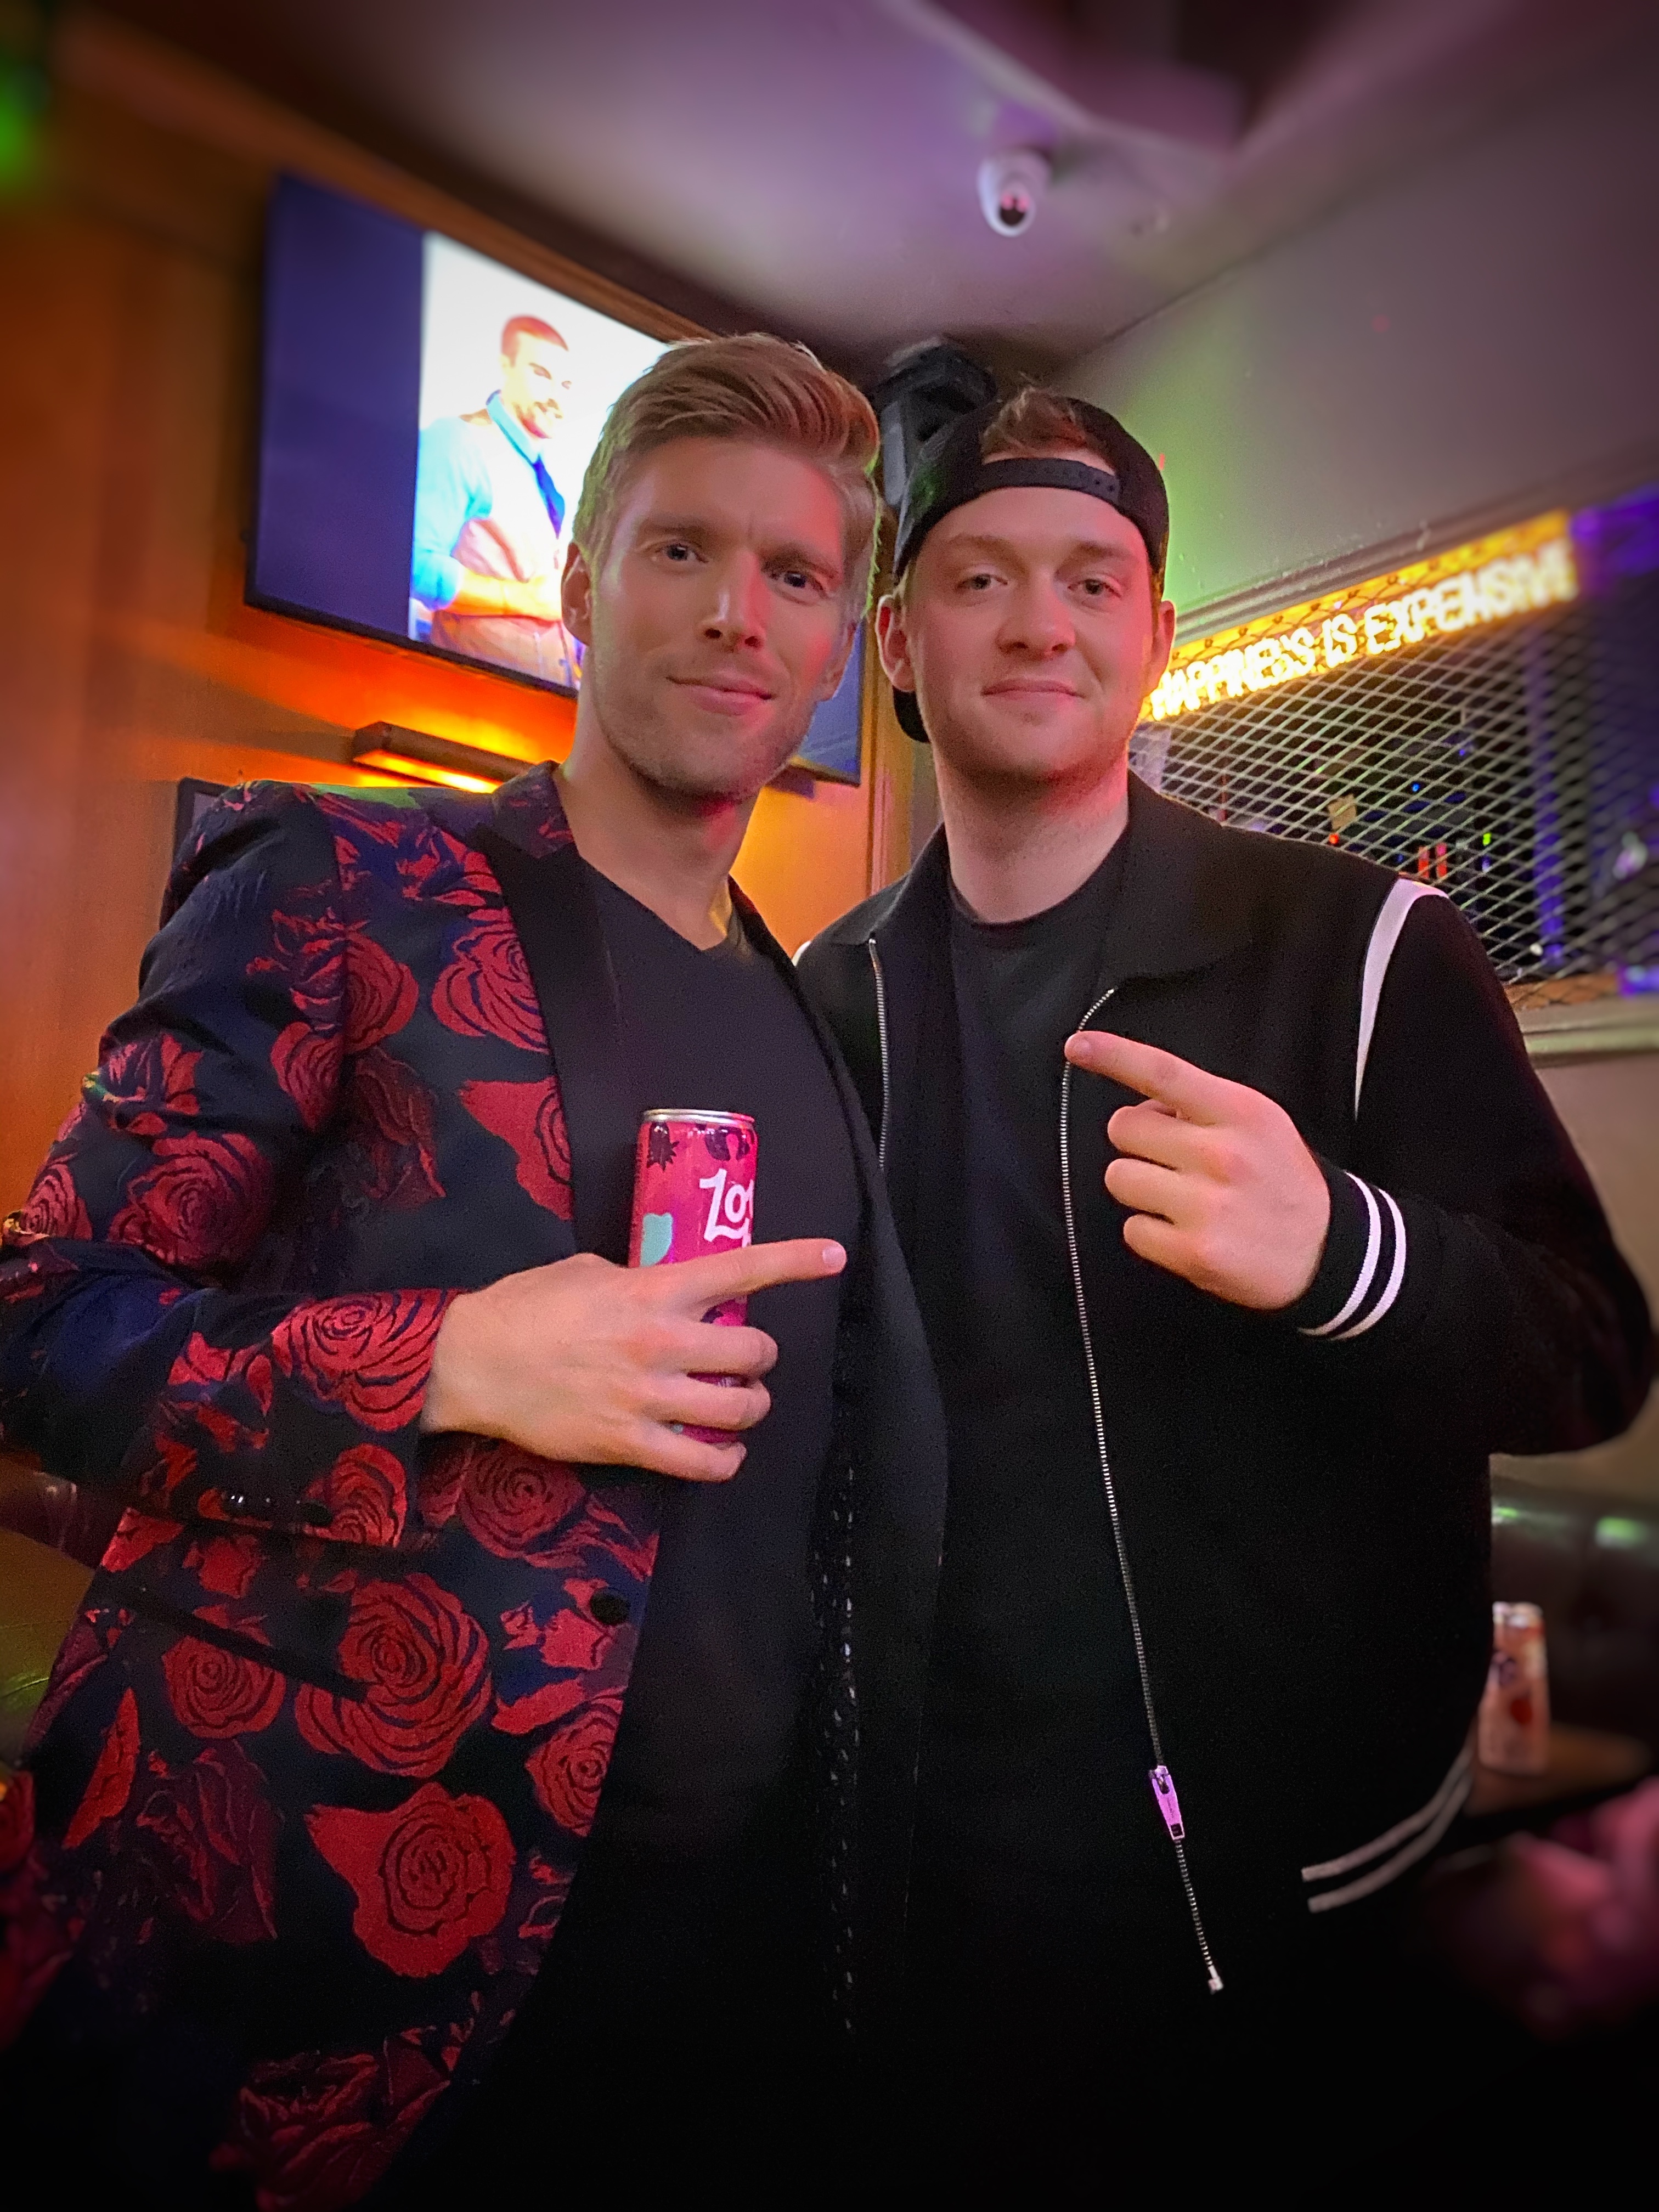 HARBER Adds Future Bass Twist to Dan + Shay’s “Tequila”